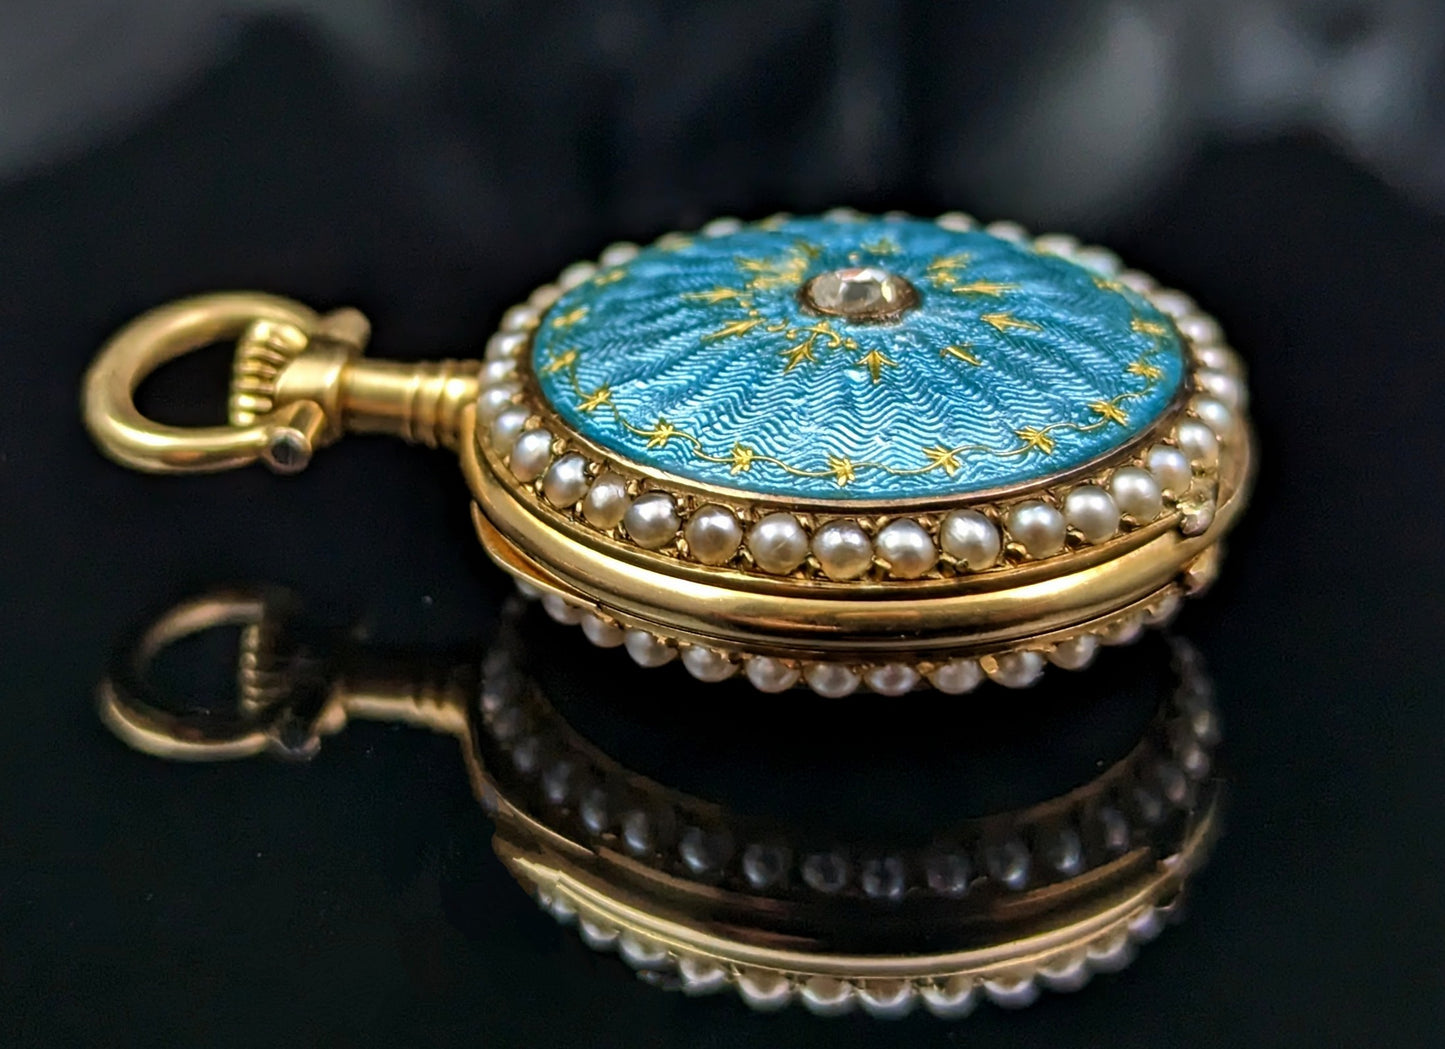 Antique Diamond and Pearl fob watch, 18k gold, Guilloche enamel